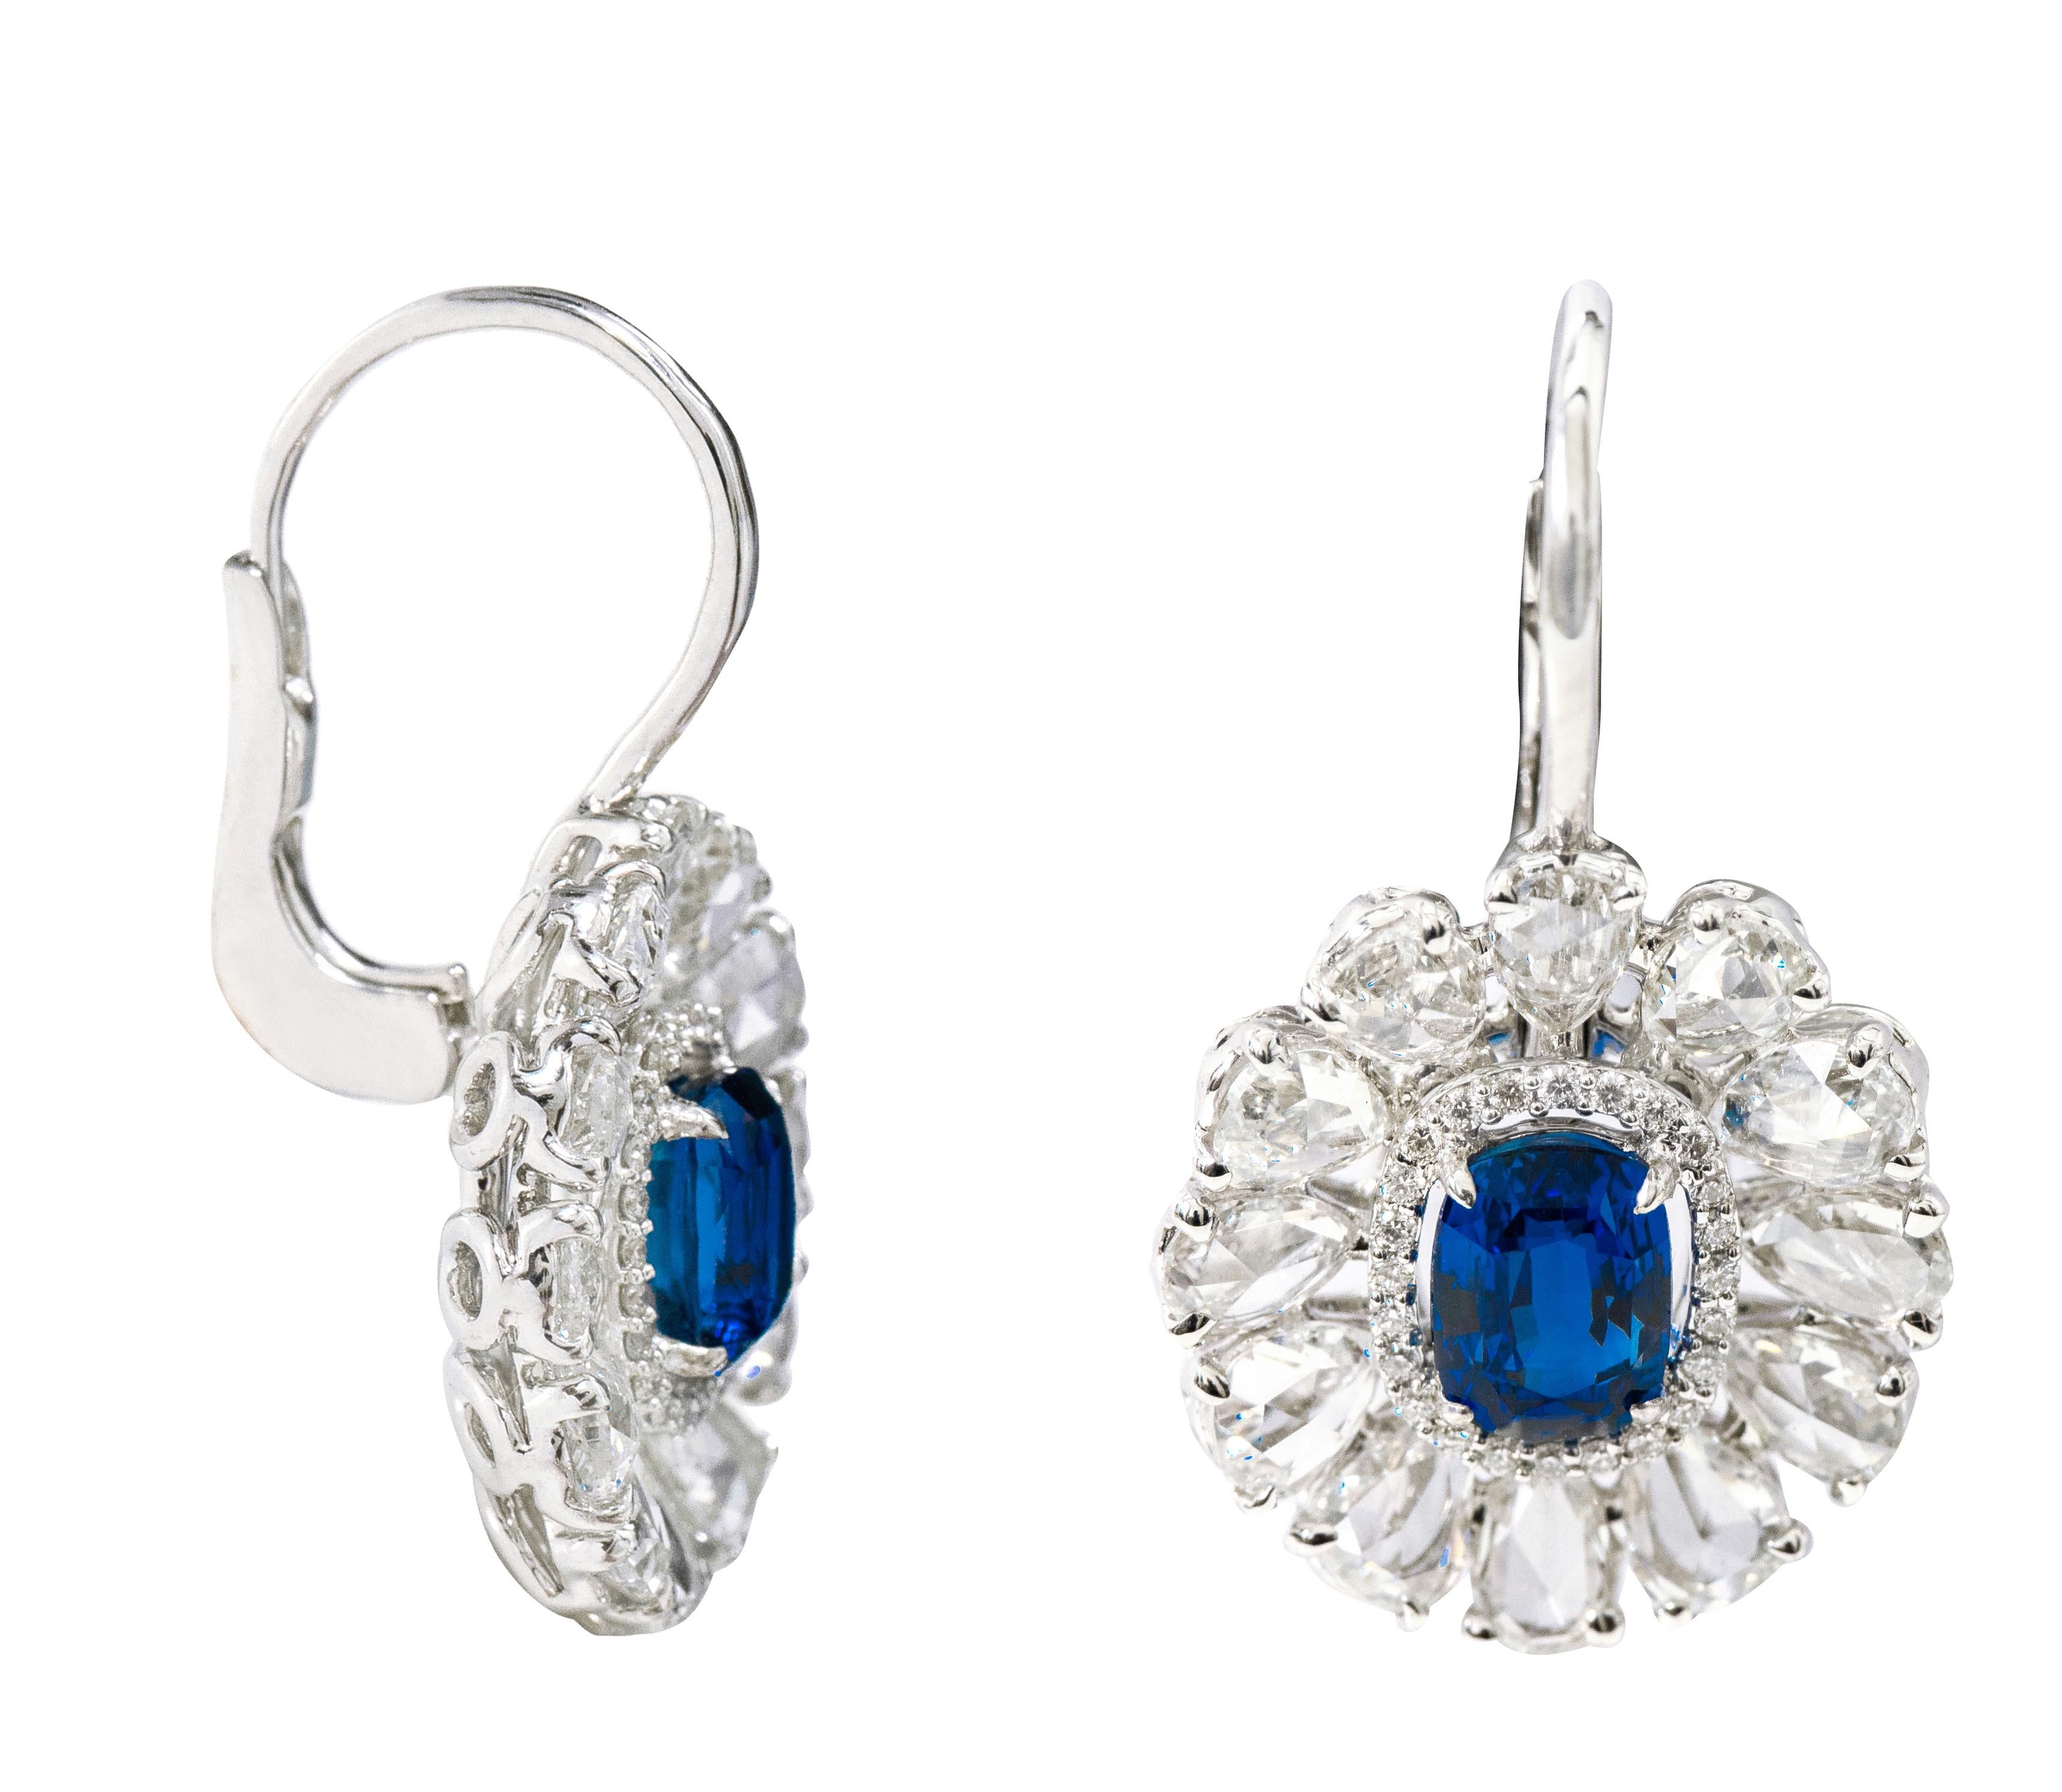 18 Karat White Gold 6.75 Carats Sapphire and Diamond Lever-Back Drop Earrings

This exquisite azure blue sapphire and diamond hanging earring is articulate. The solitaire oval sapphire is brilliantly surrounded with a fine pave set round diamond